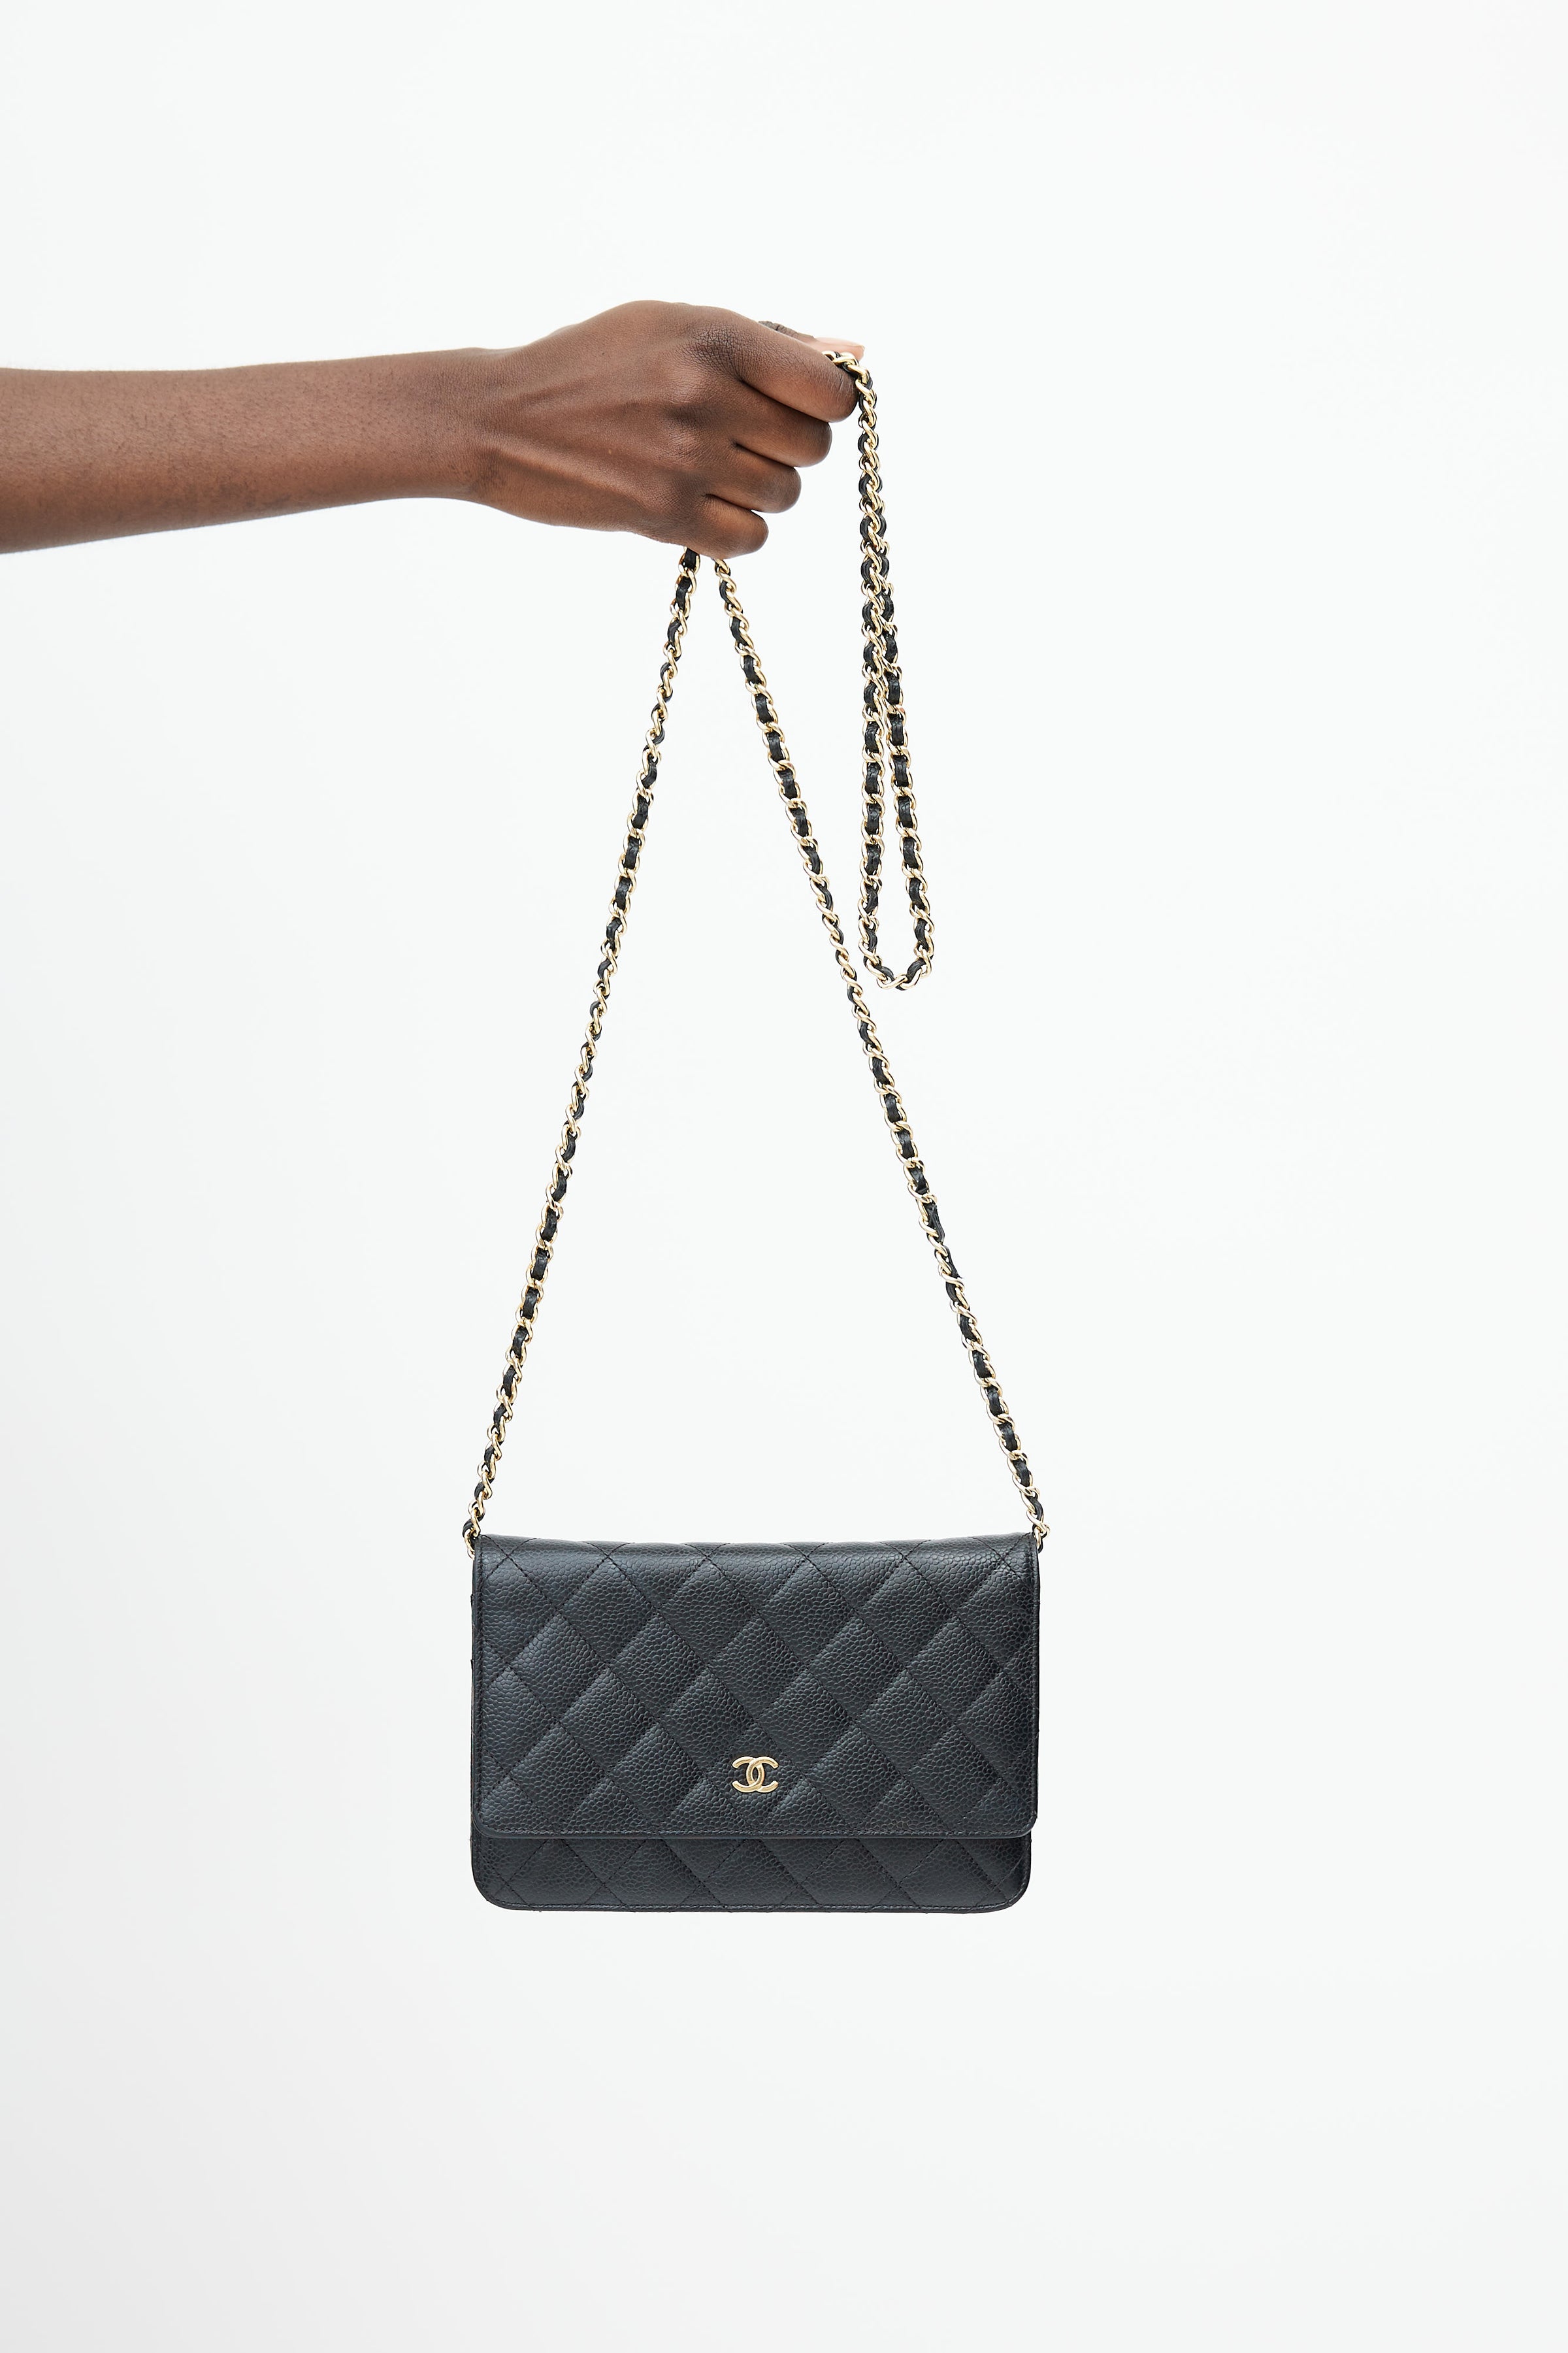 chanel classic on chain black